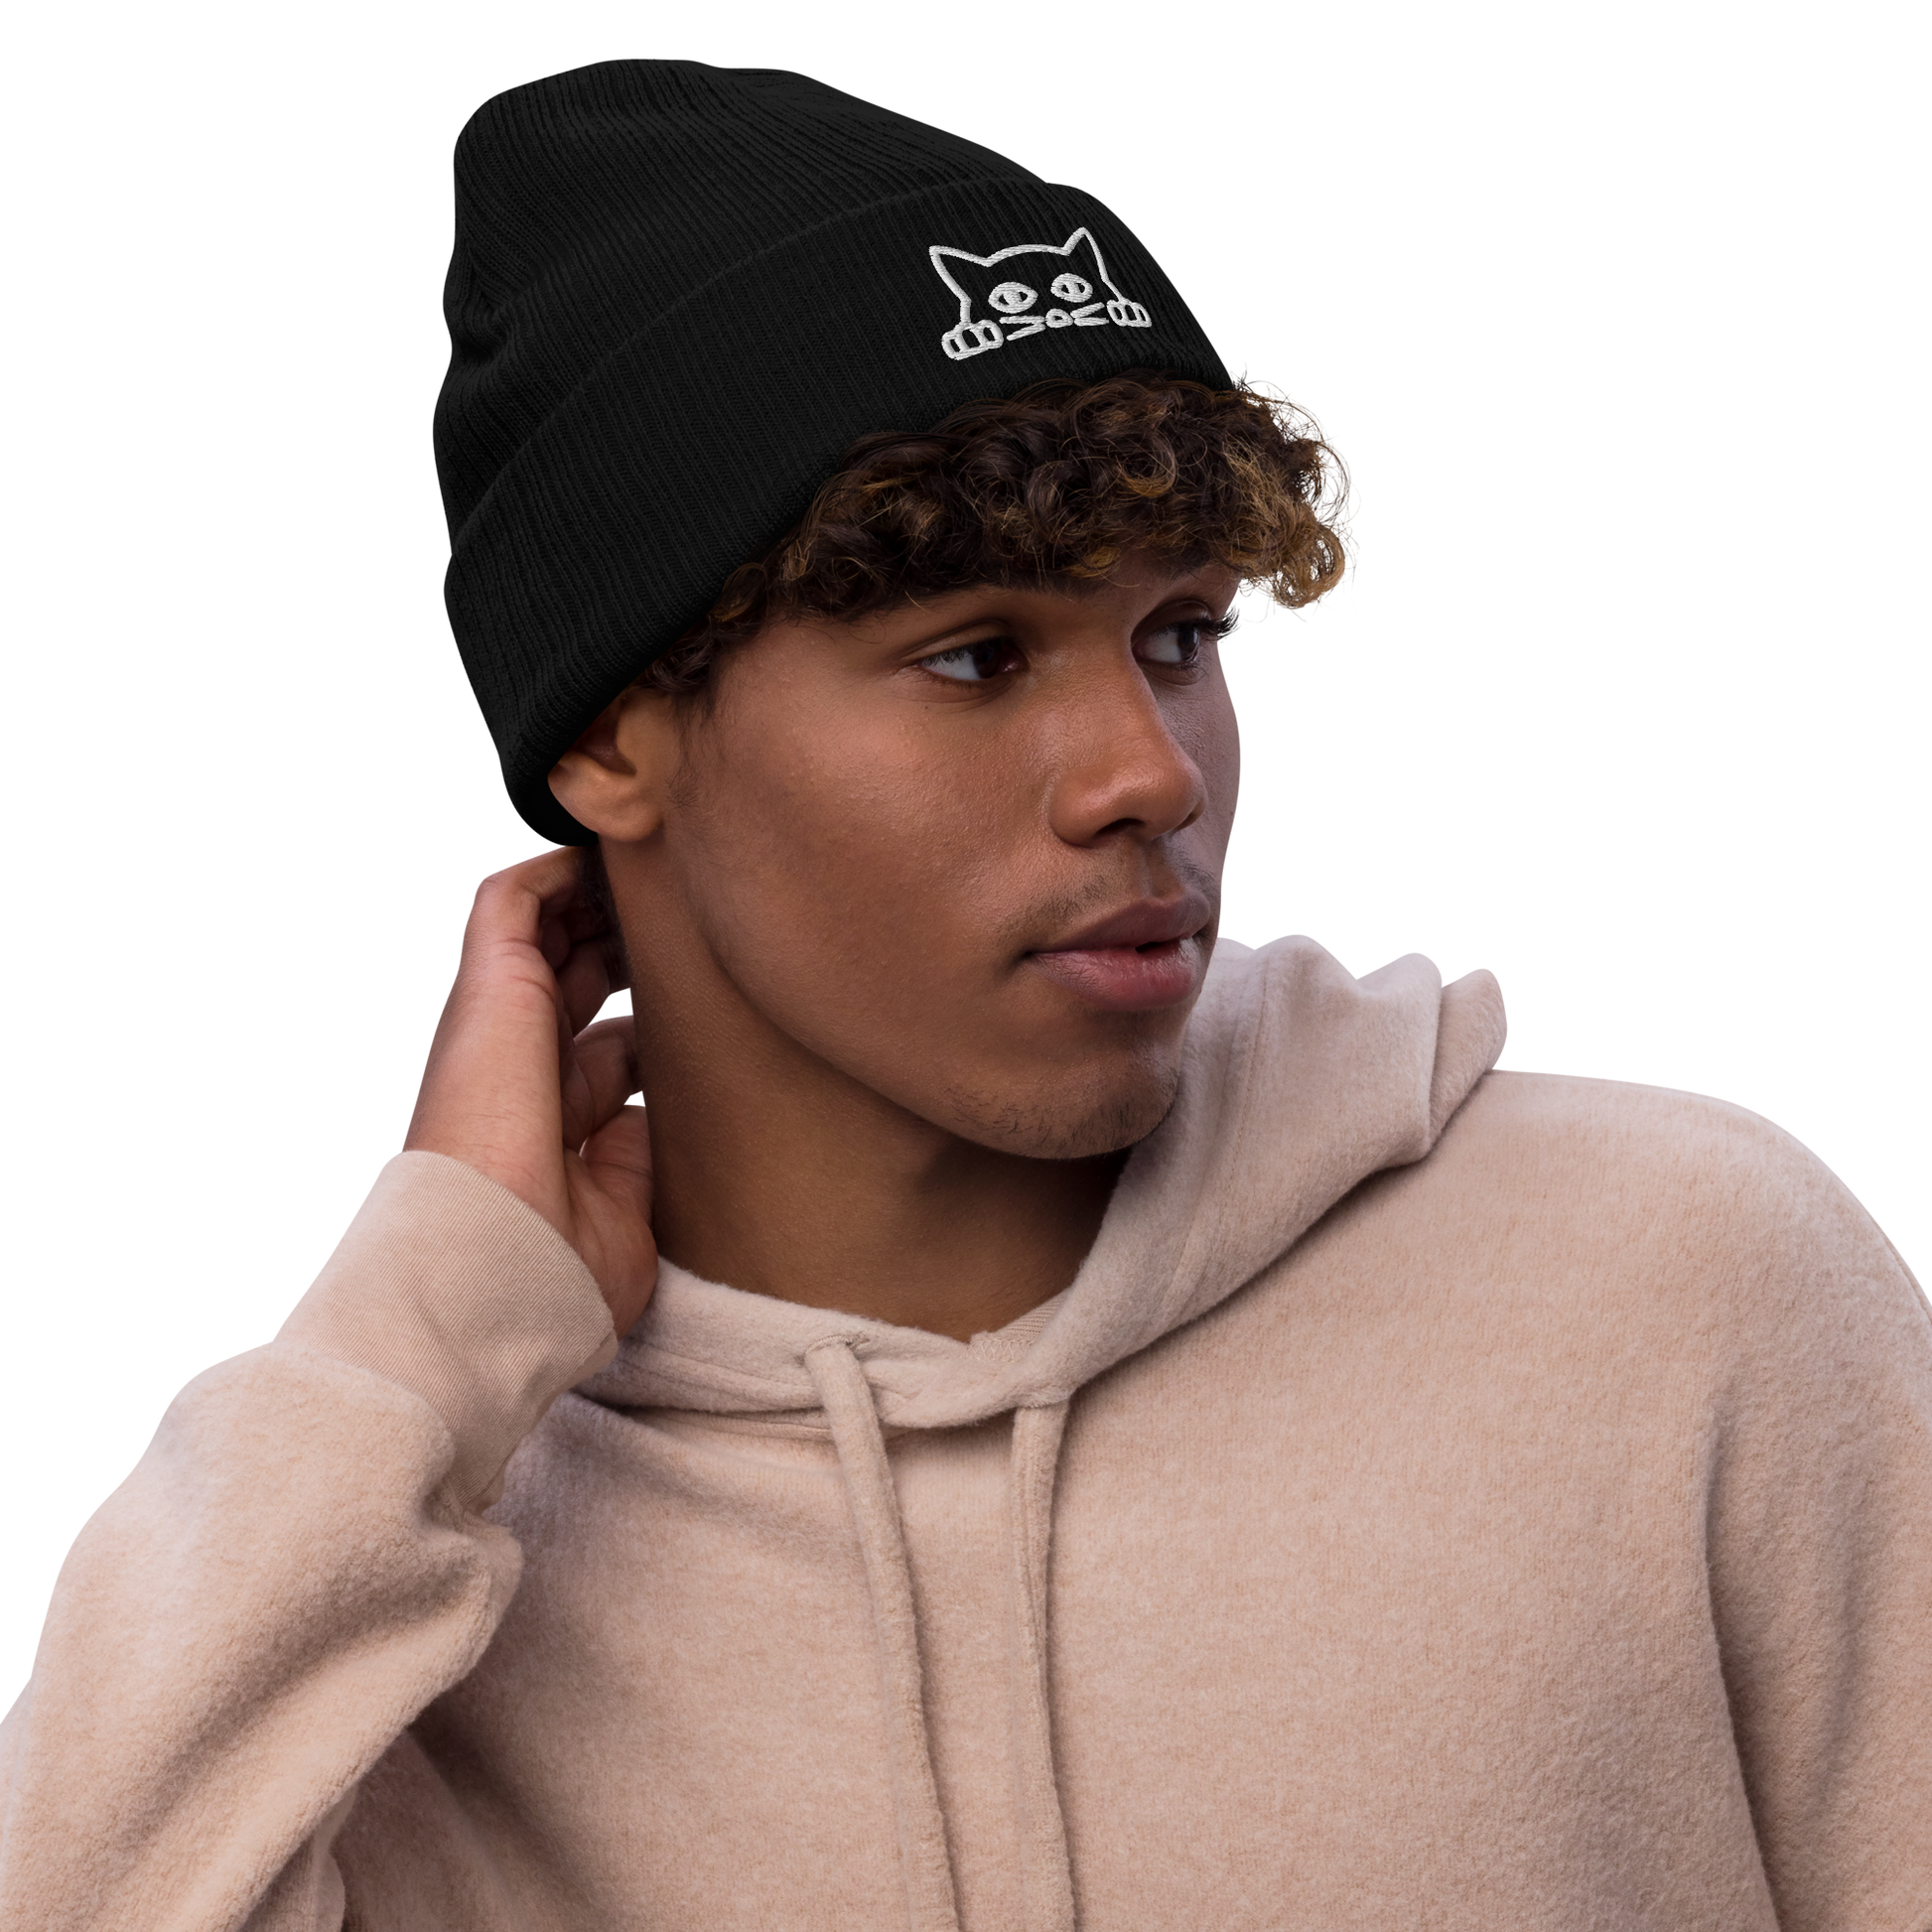 Man wearing a Black Ribbed Knit Cat Beanie Featuring A Charming Peeking Cat Embroidery On The Fold - Shop Cool Winter Beanies Online - Boozy Fox